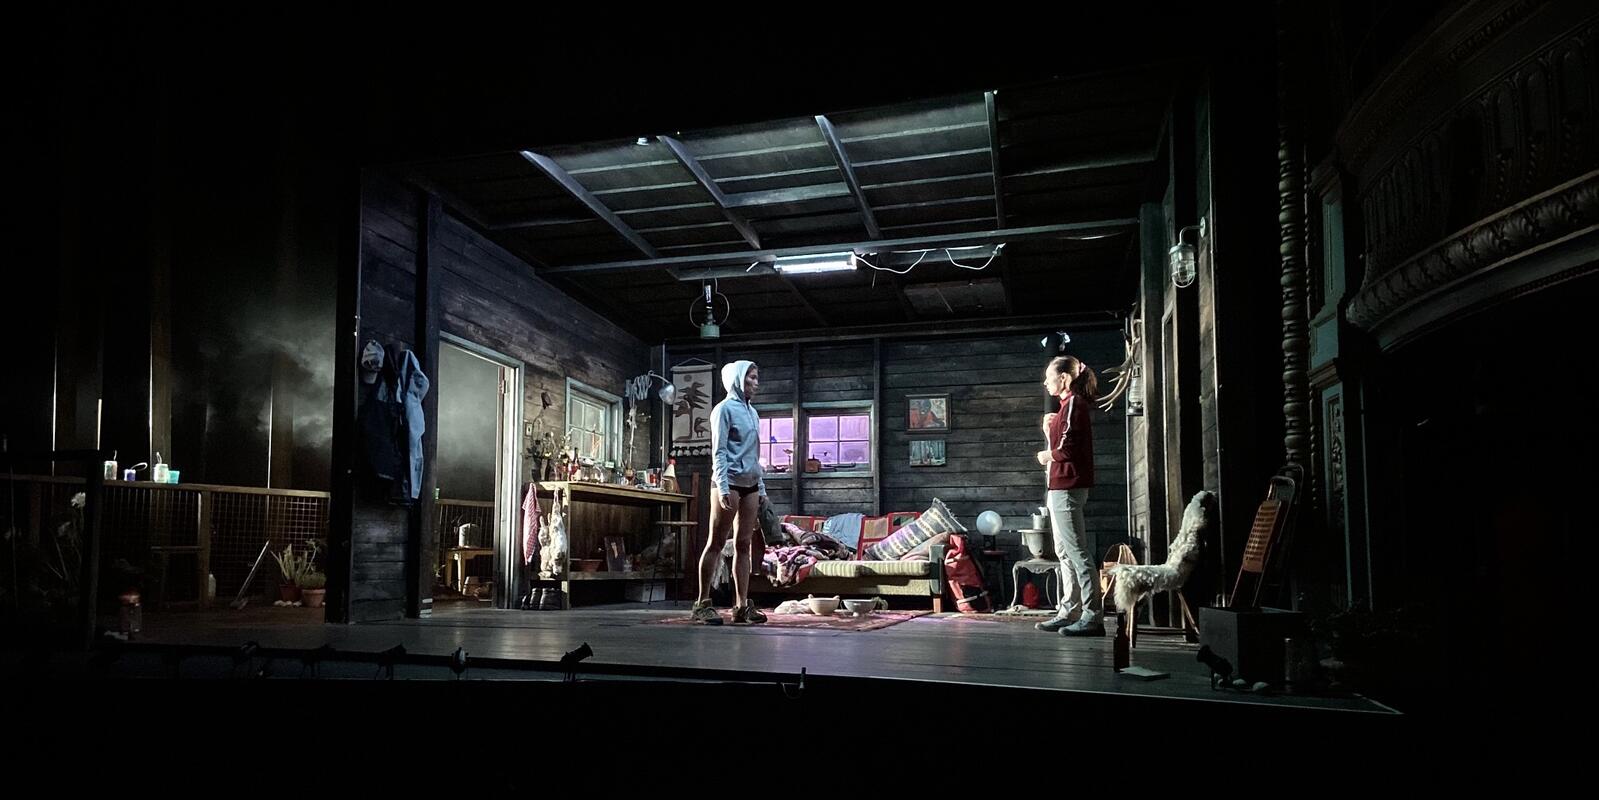 Photograph from WALDEN - lighting design by Azusa Ono